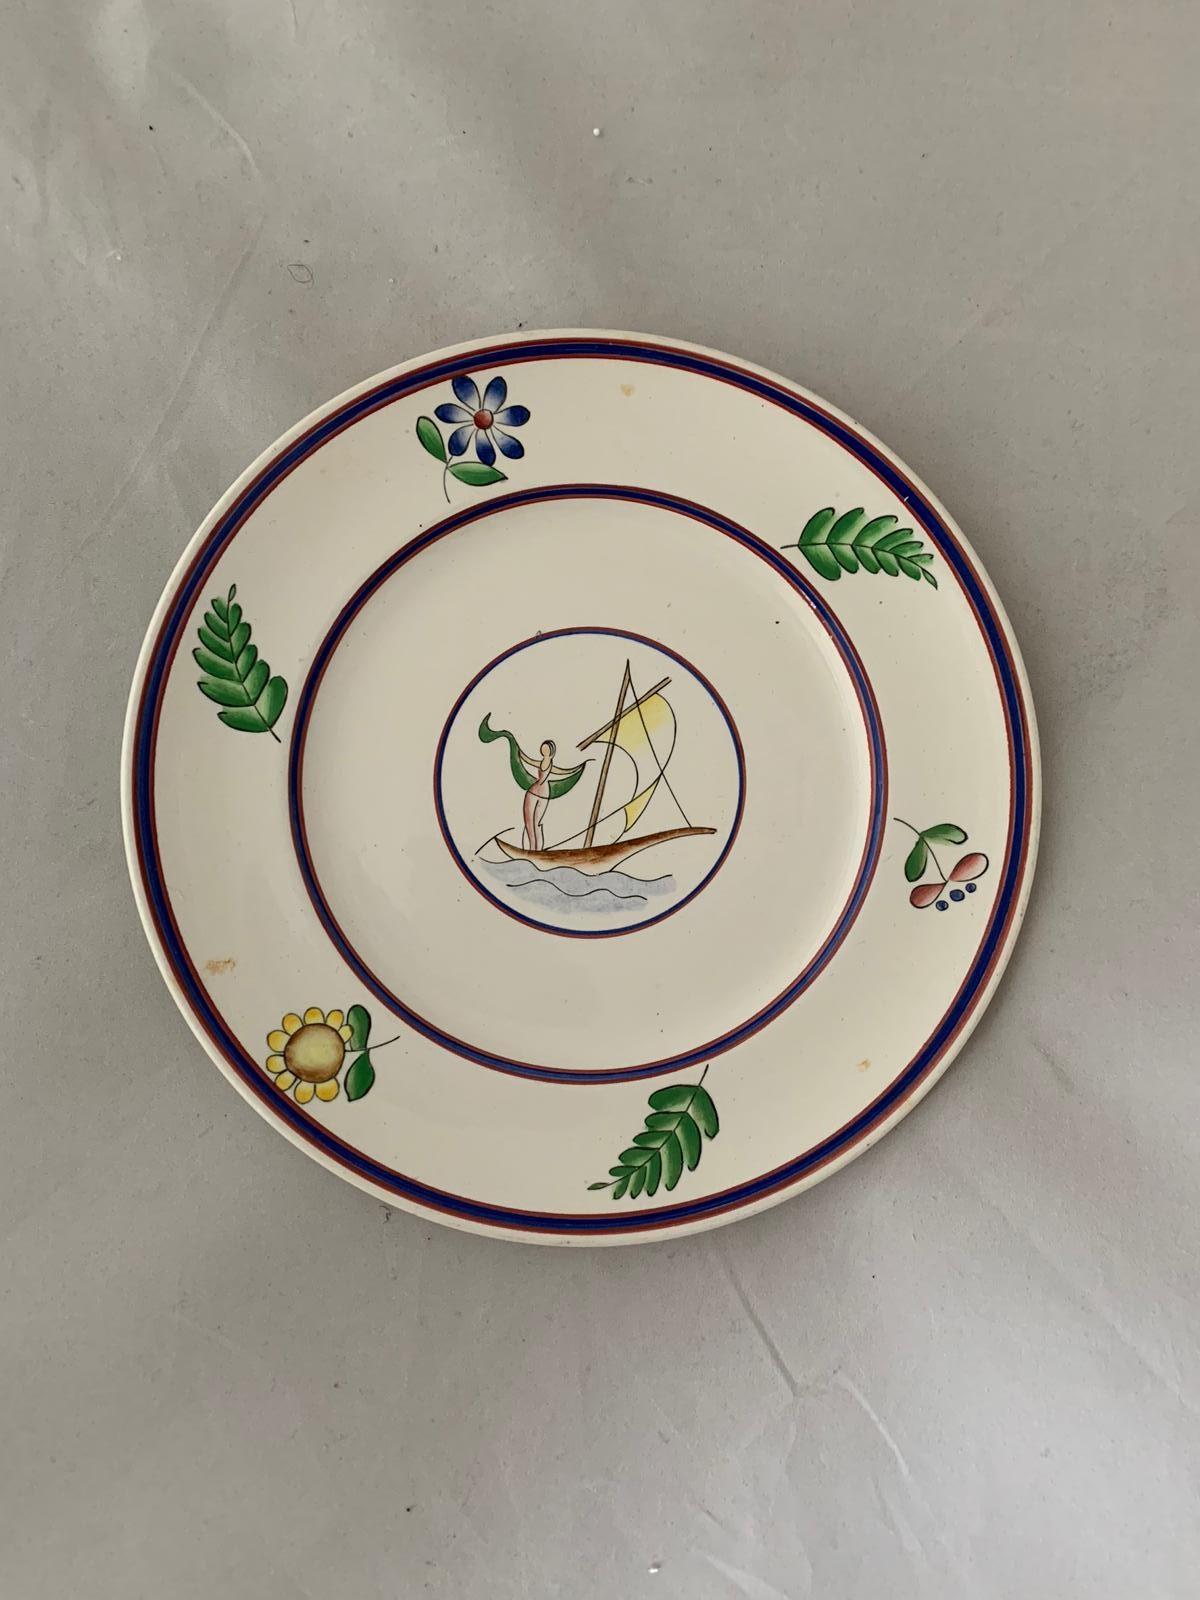 Plate like the Velesca by Gio Ponti, missing mark unknown origin, material similar to the original and presumably similar period, given the evolution of the color of ceramics.